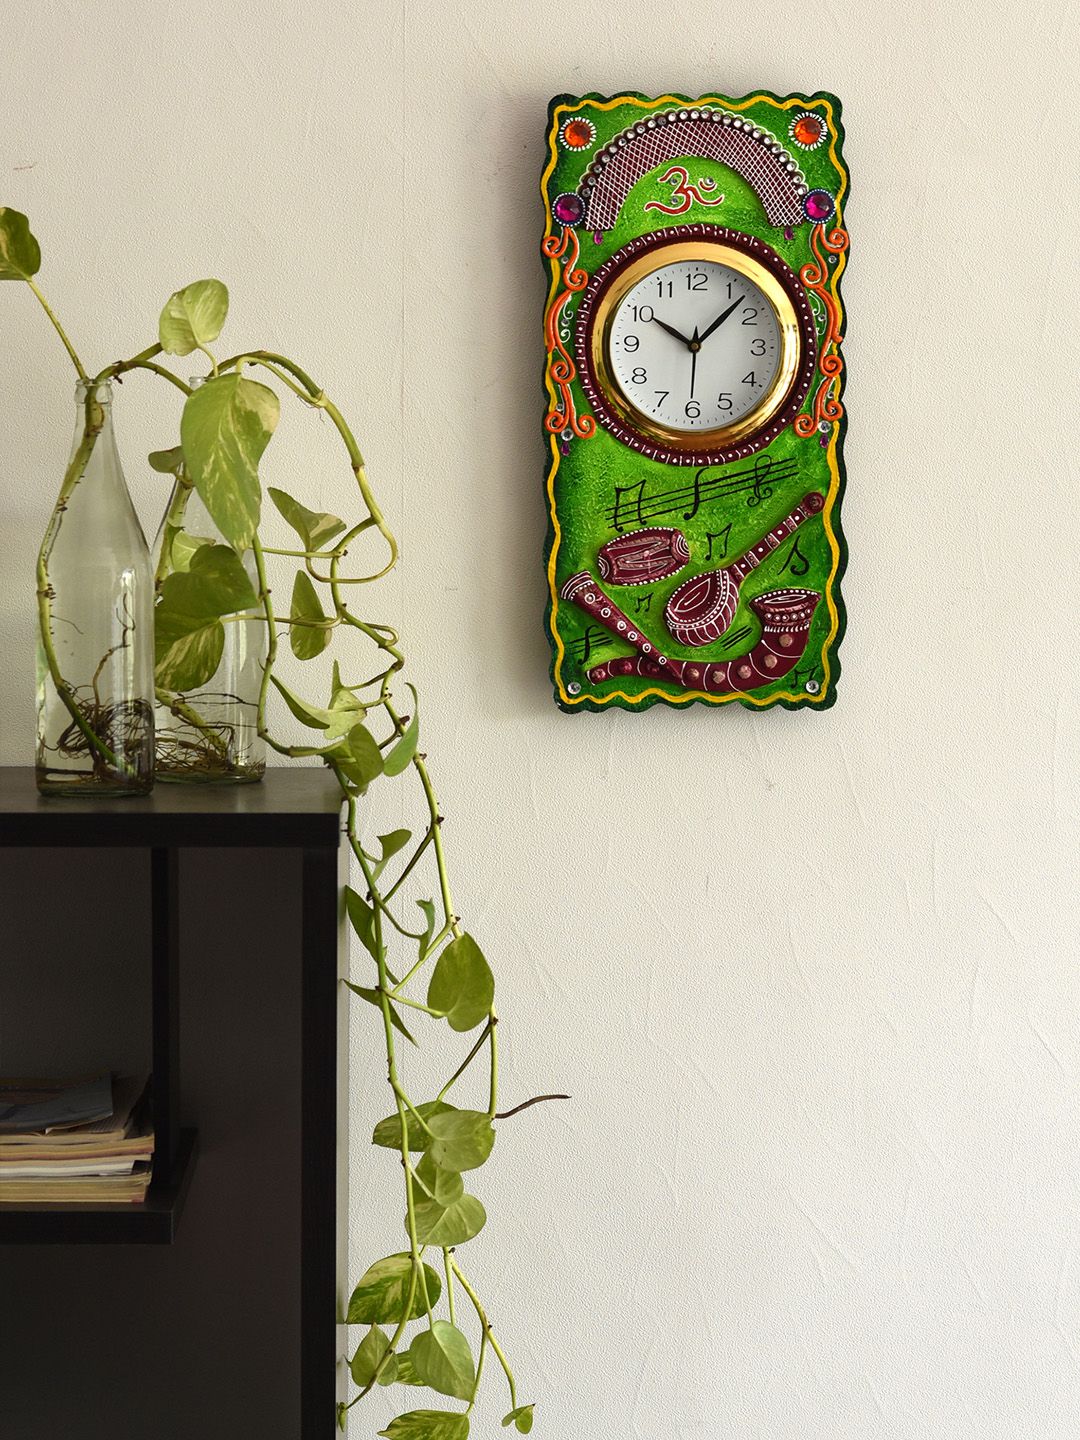 eCraftIndia Unisex White & Green Rectangle Printed Analogue Wall Clock KWC628 Price in India